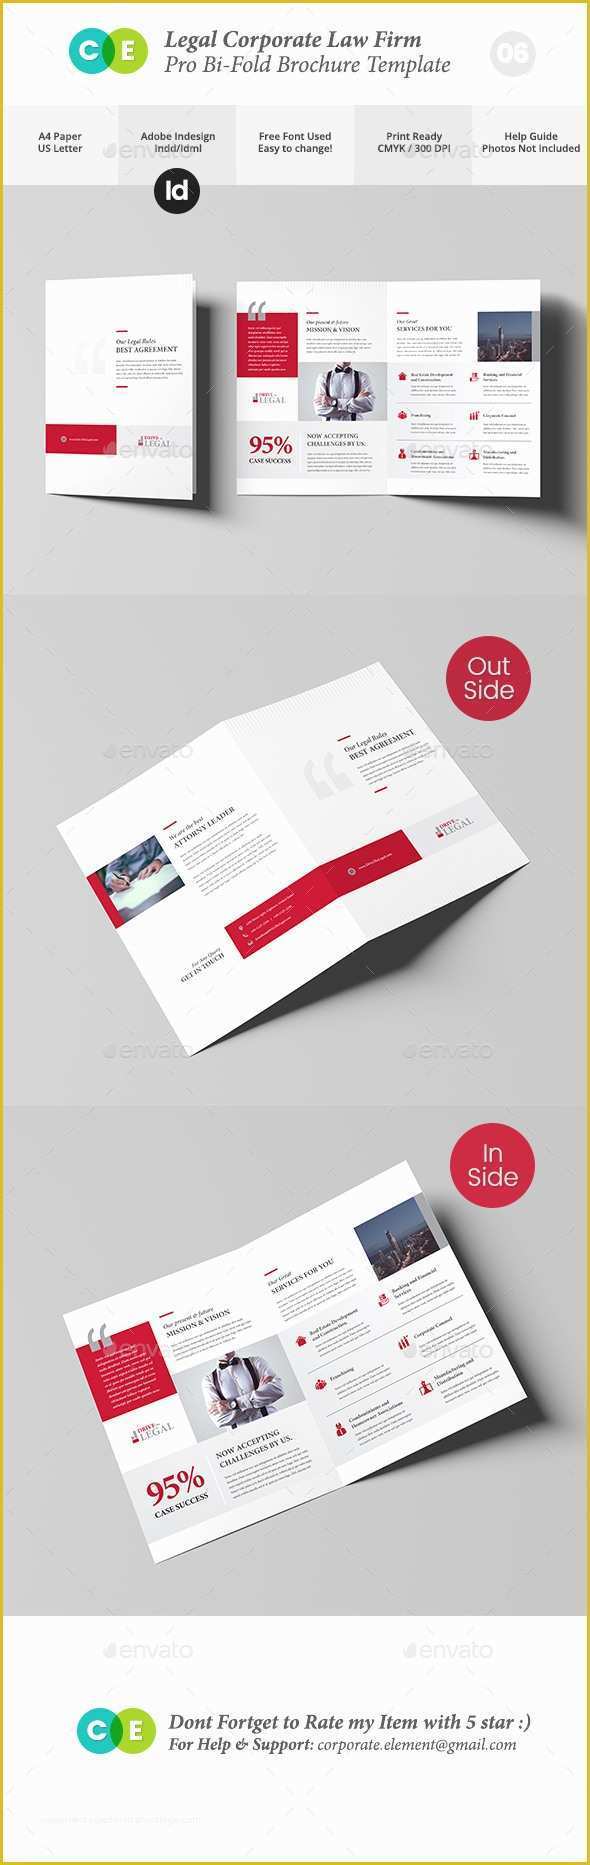 Free Legal Brochure Templates Of Legal Corporate Law Firm Business Bi Fold Brochure V06 by